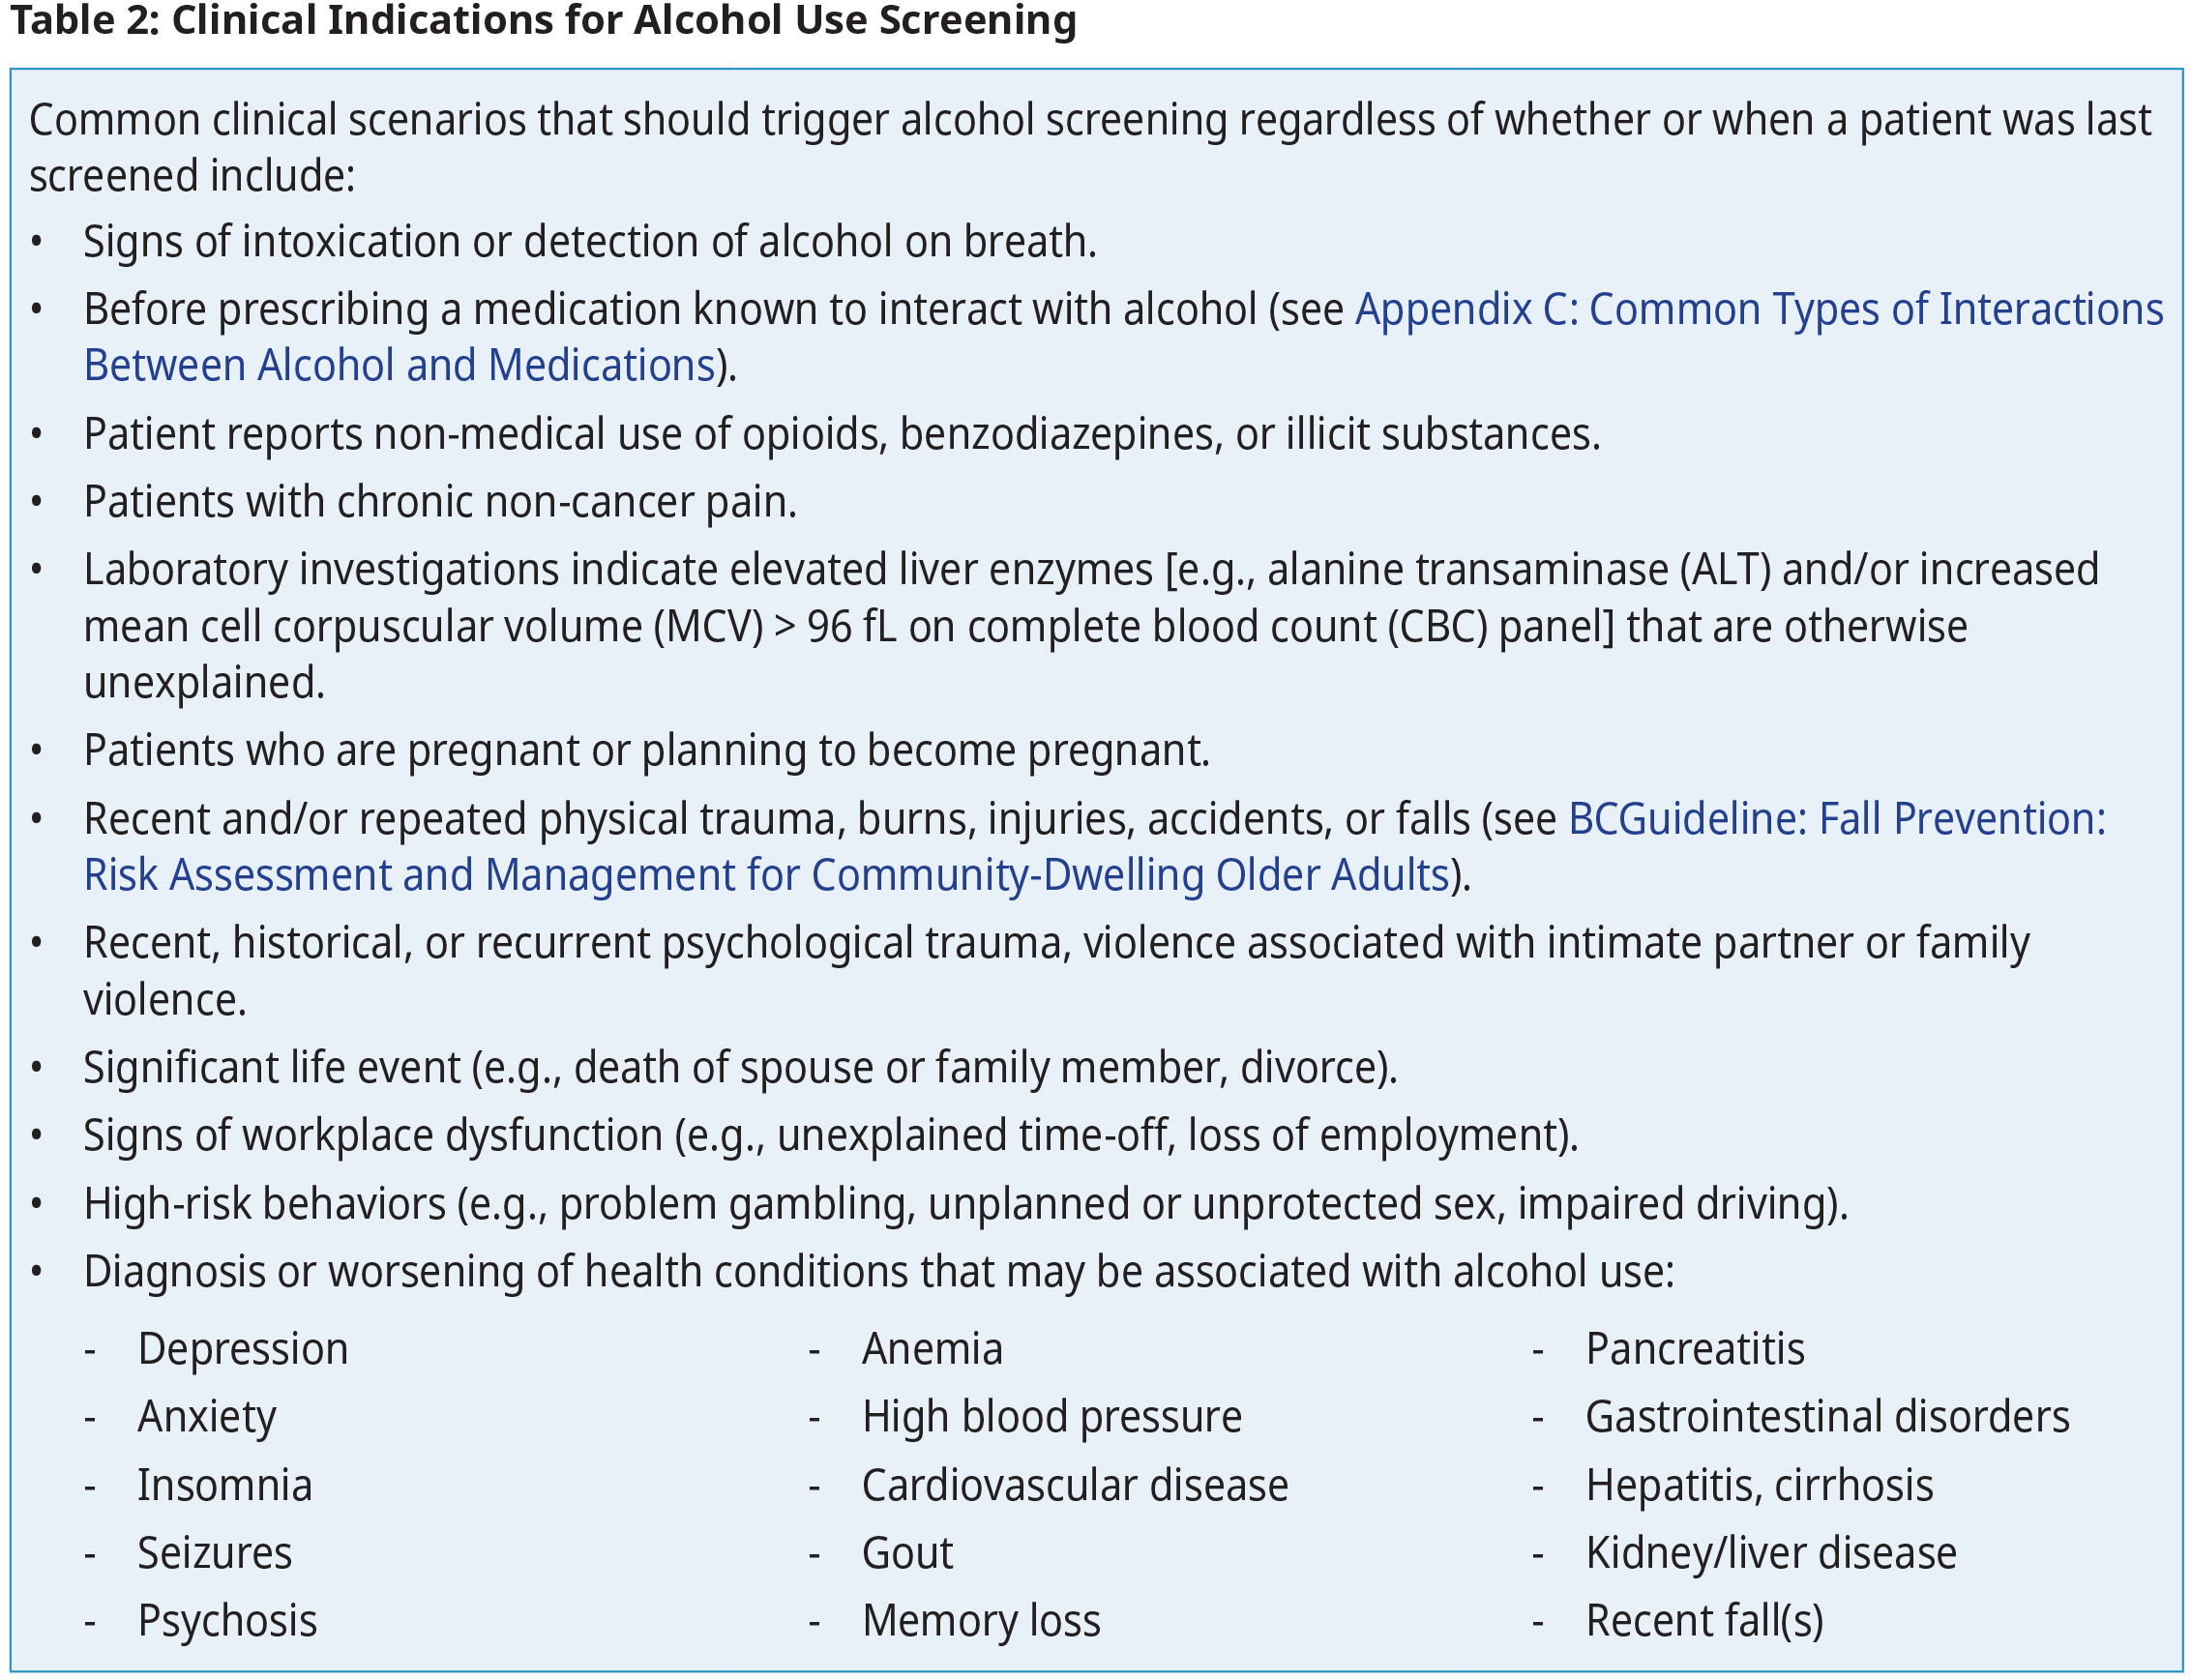 Clinical Indications for Alcohol Use Screening